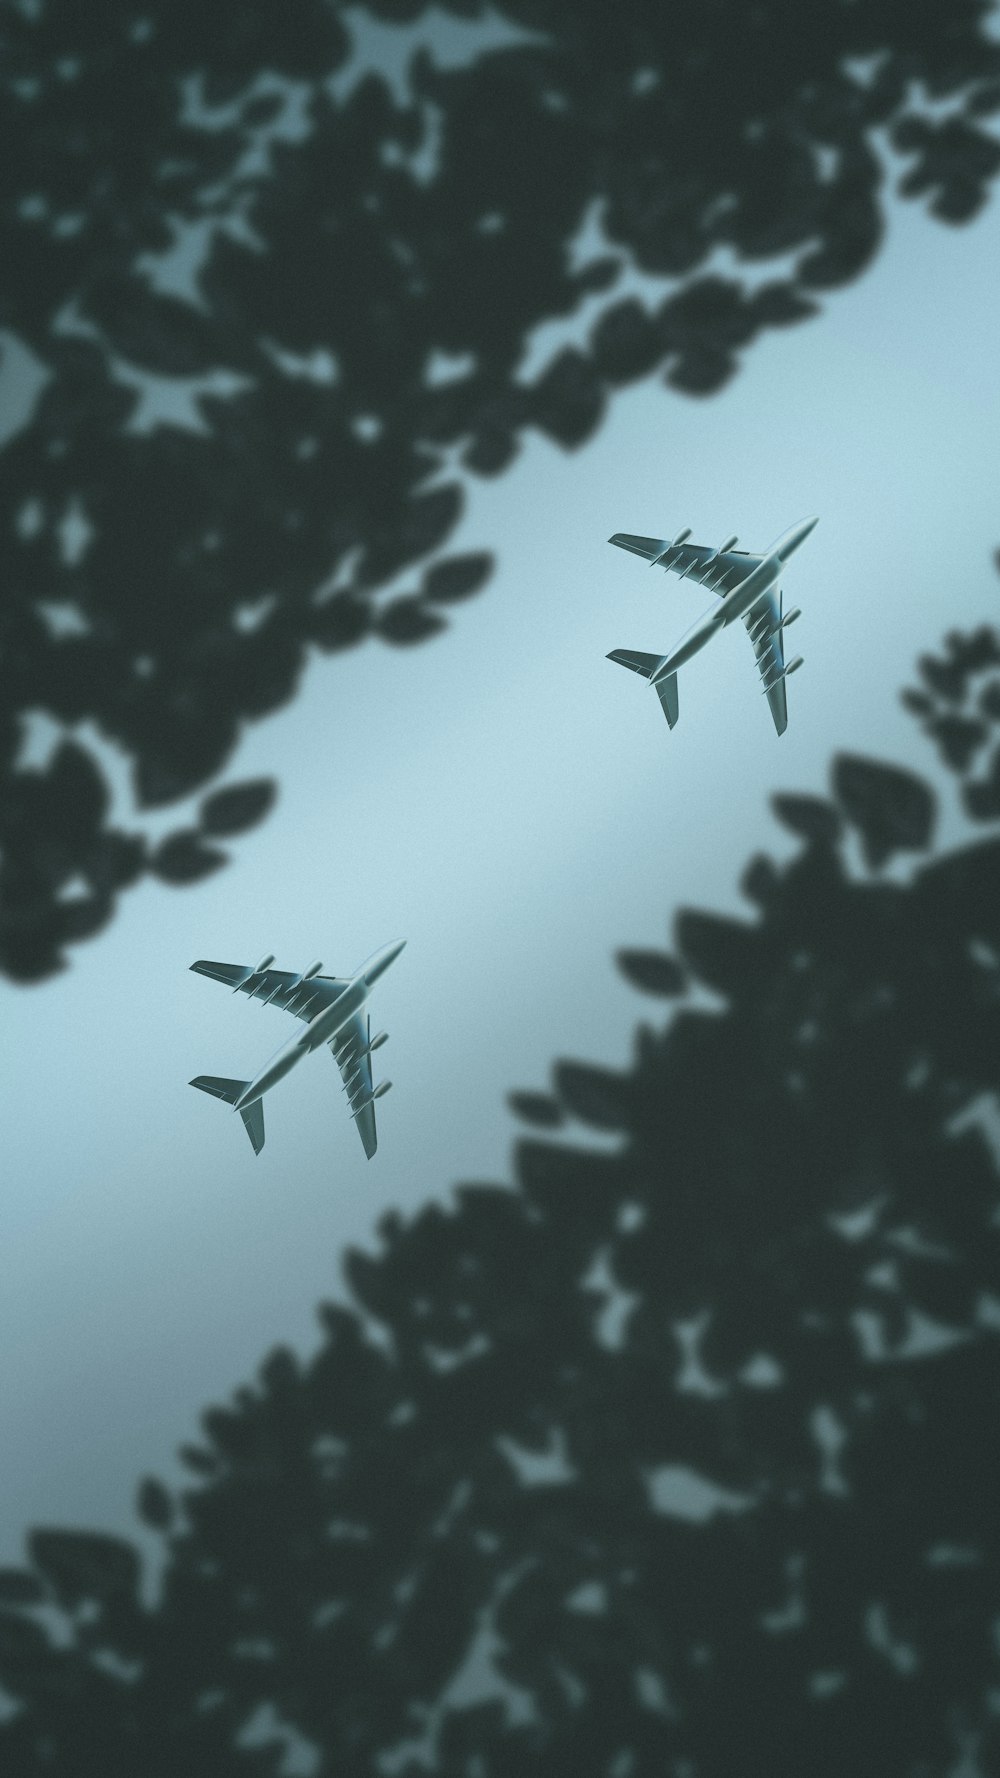 two airplanes flying in the sky above trees